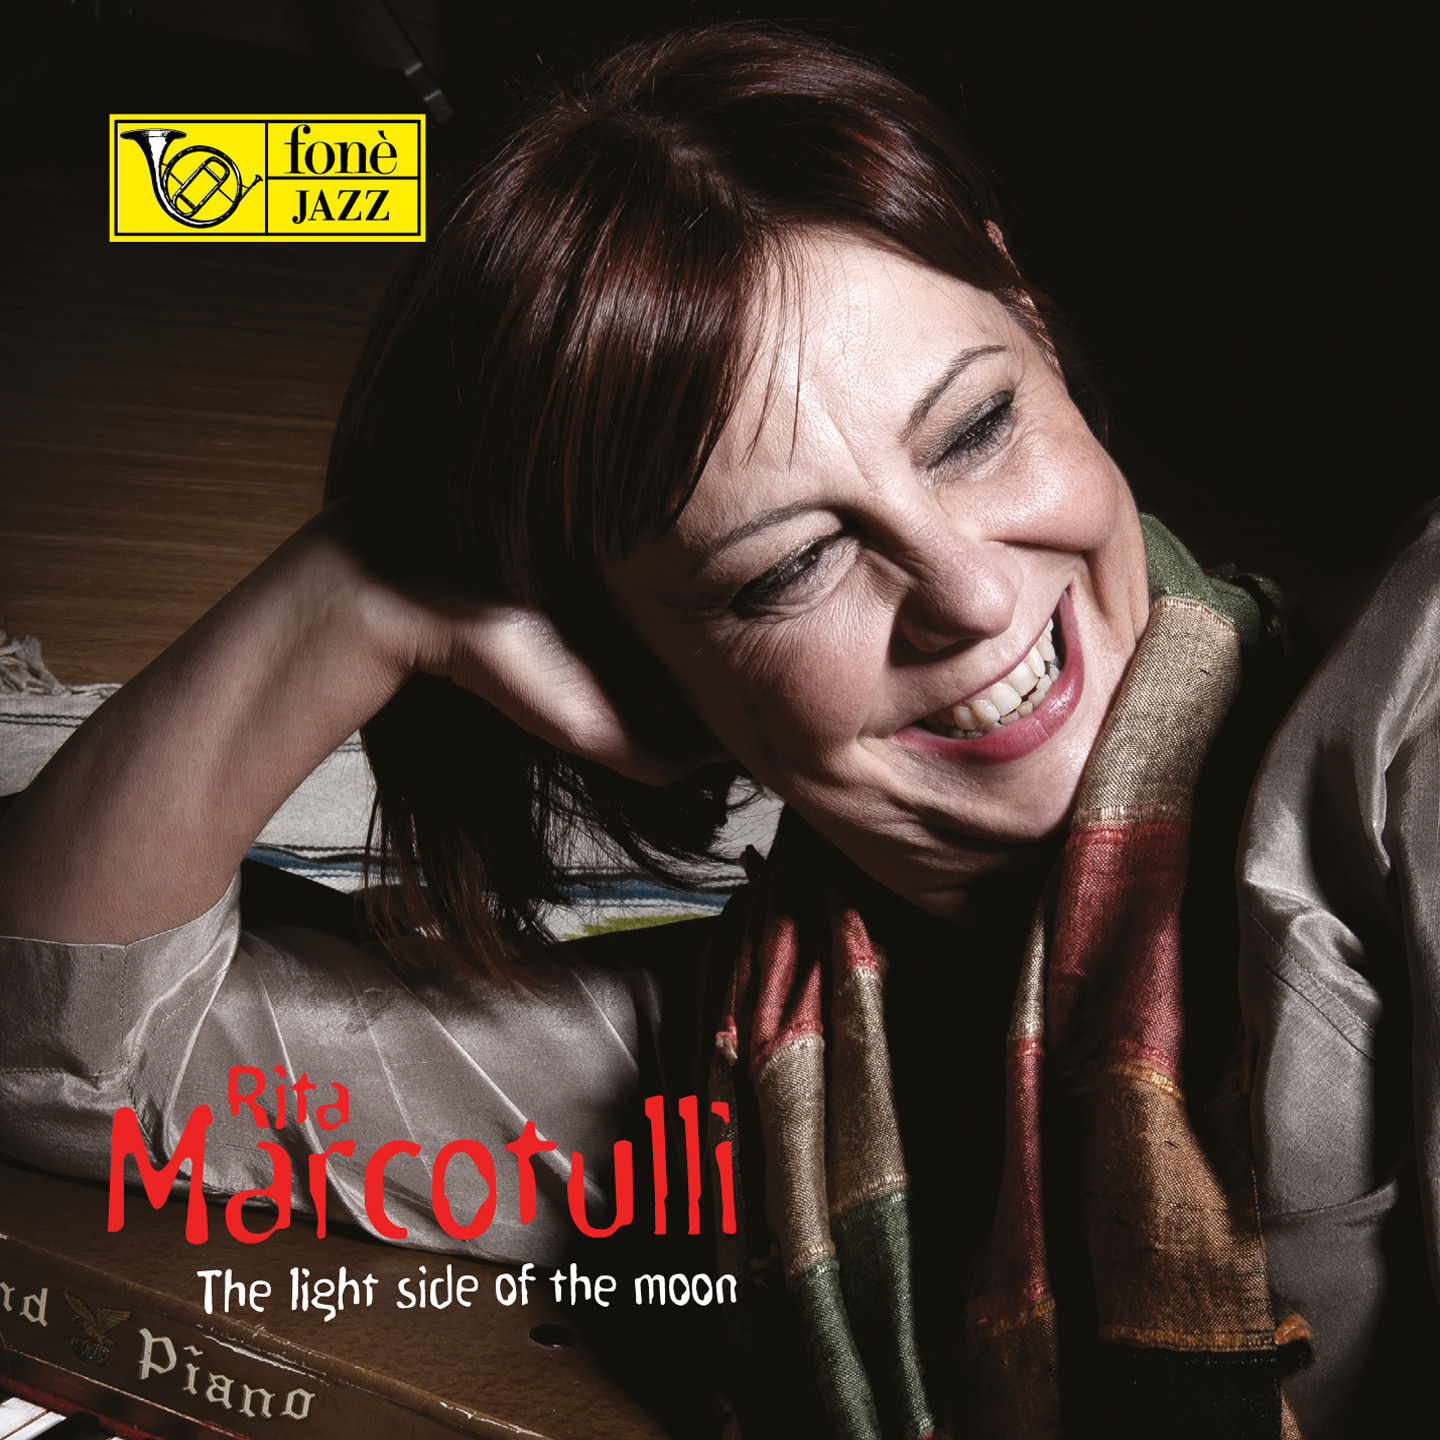 Rita Marcotulli – The Light Side Of The Moon (2006/2017) [NativeDSDmusic DSF DSD64/2.82MHz + FLAC 24bit/88,2kHz]